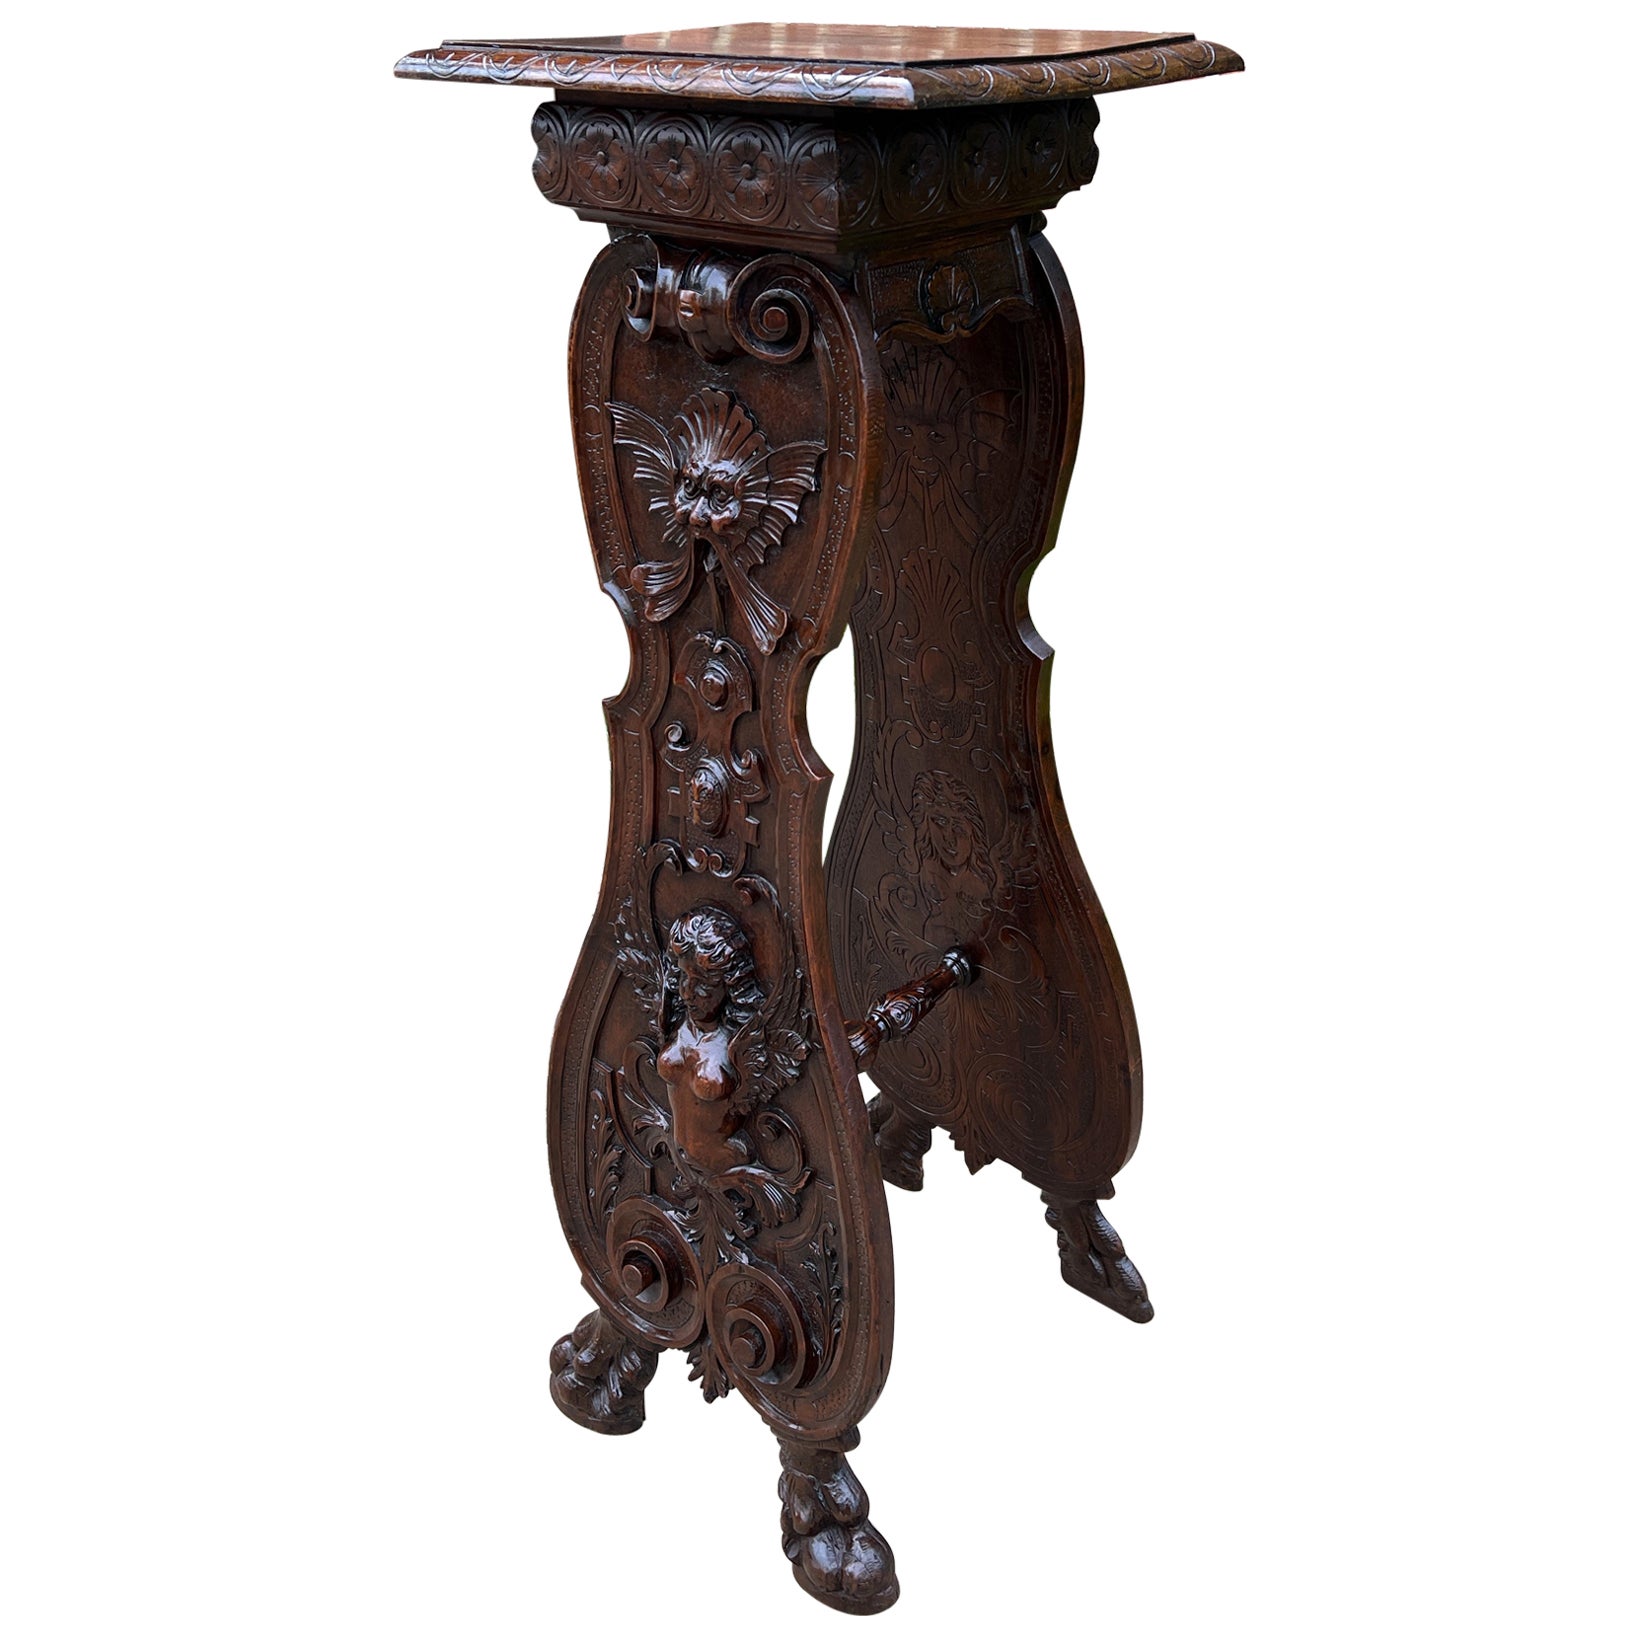 Antique Français Pedestal Plant Stand Display Table Carved Oak Tall 19th C.